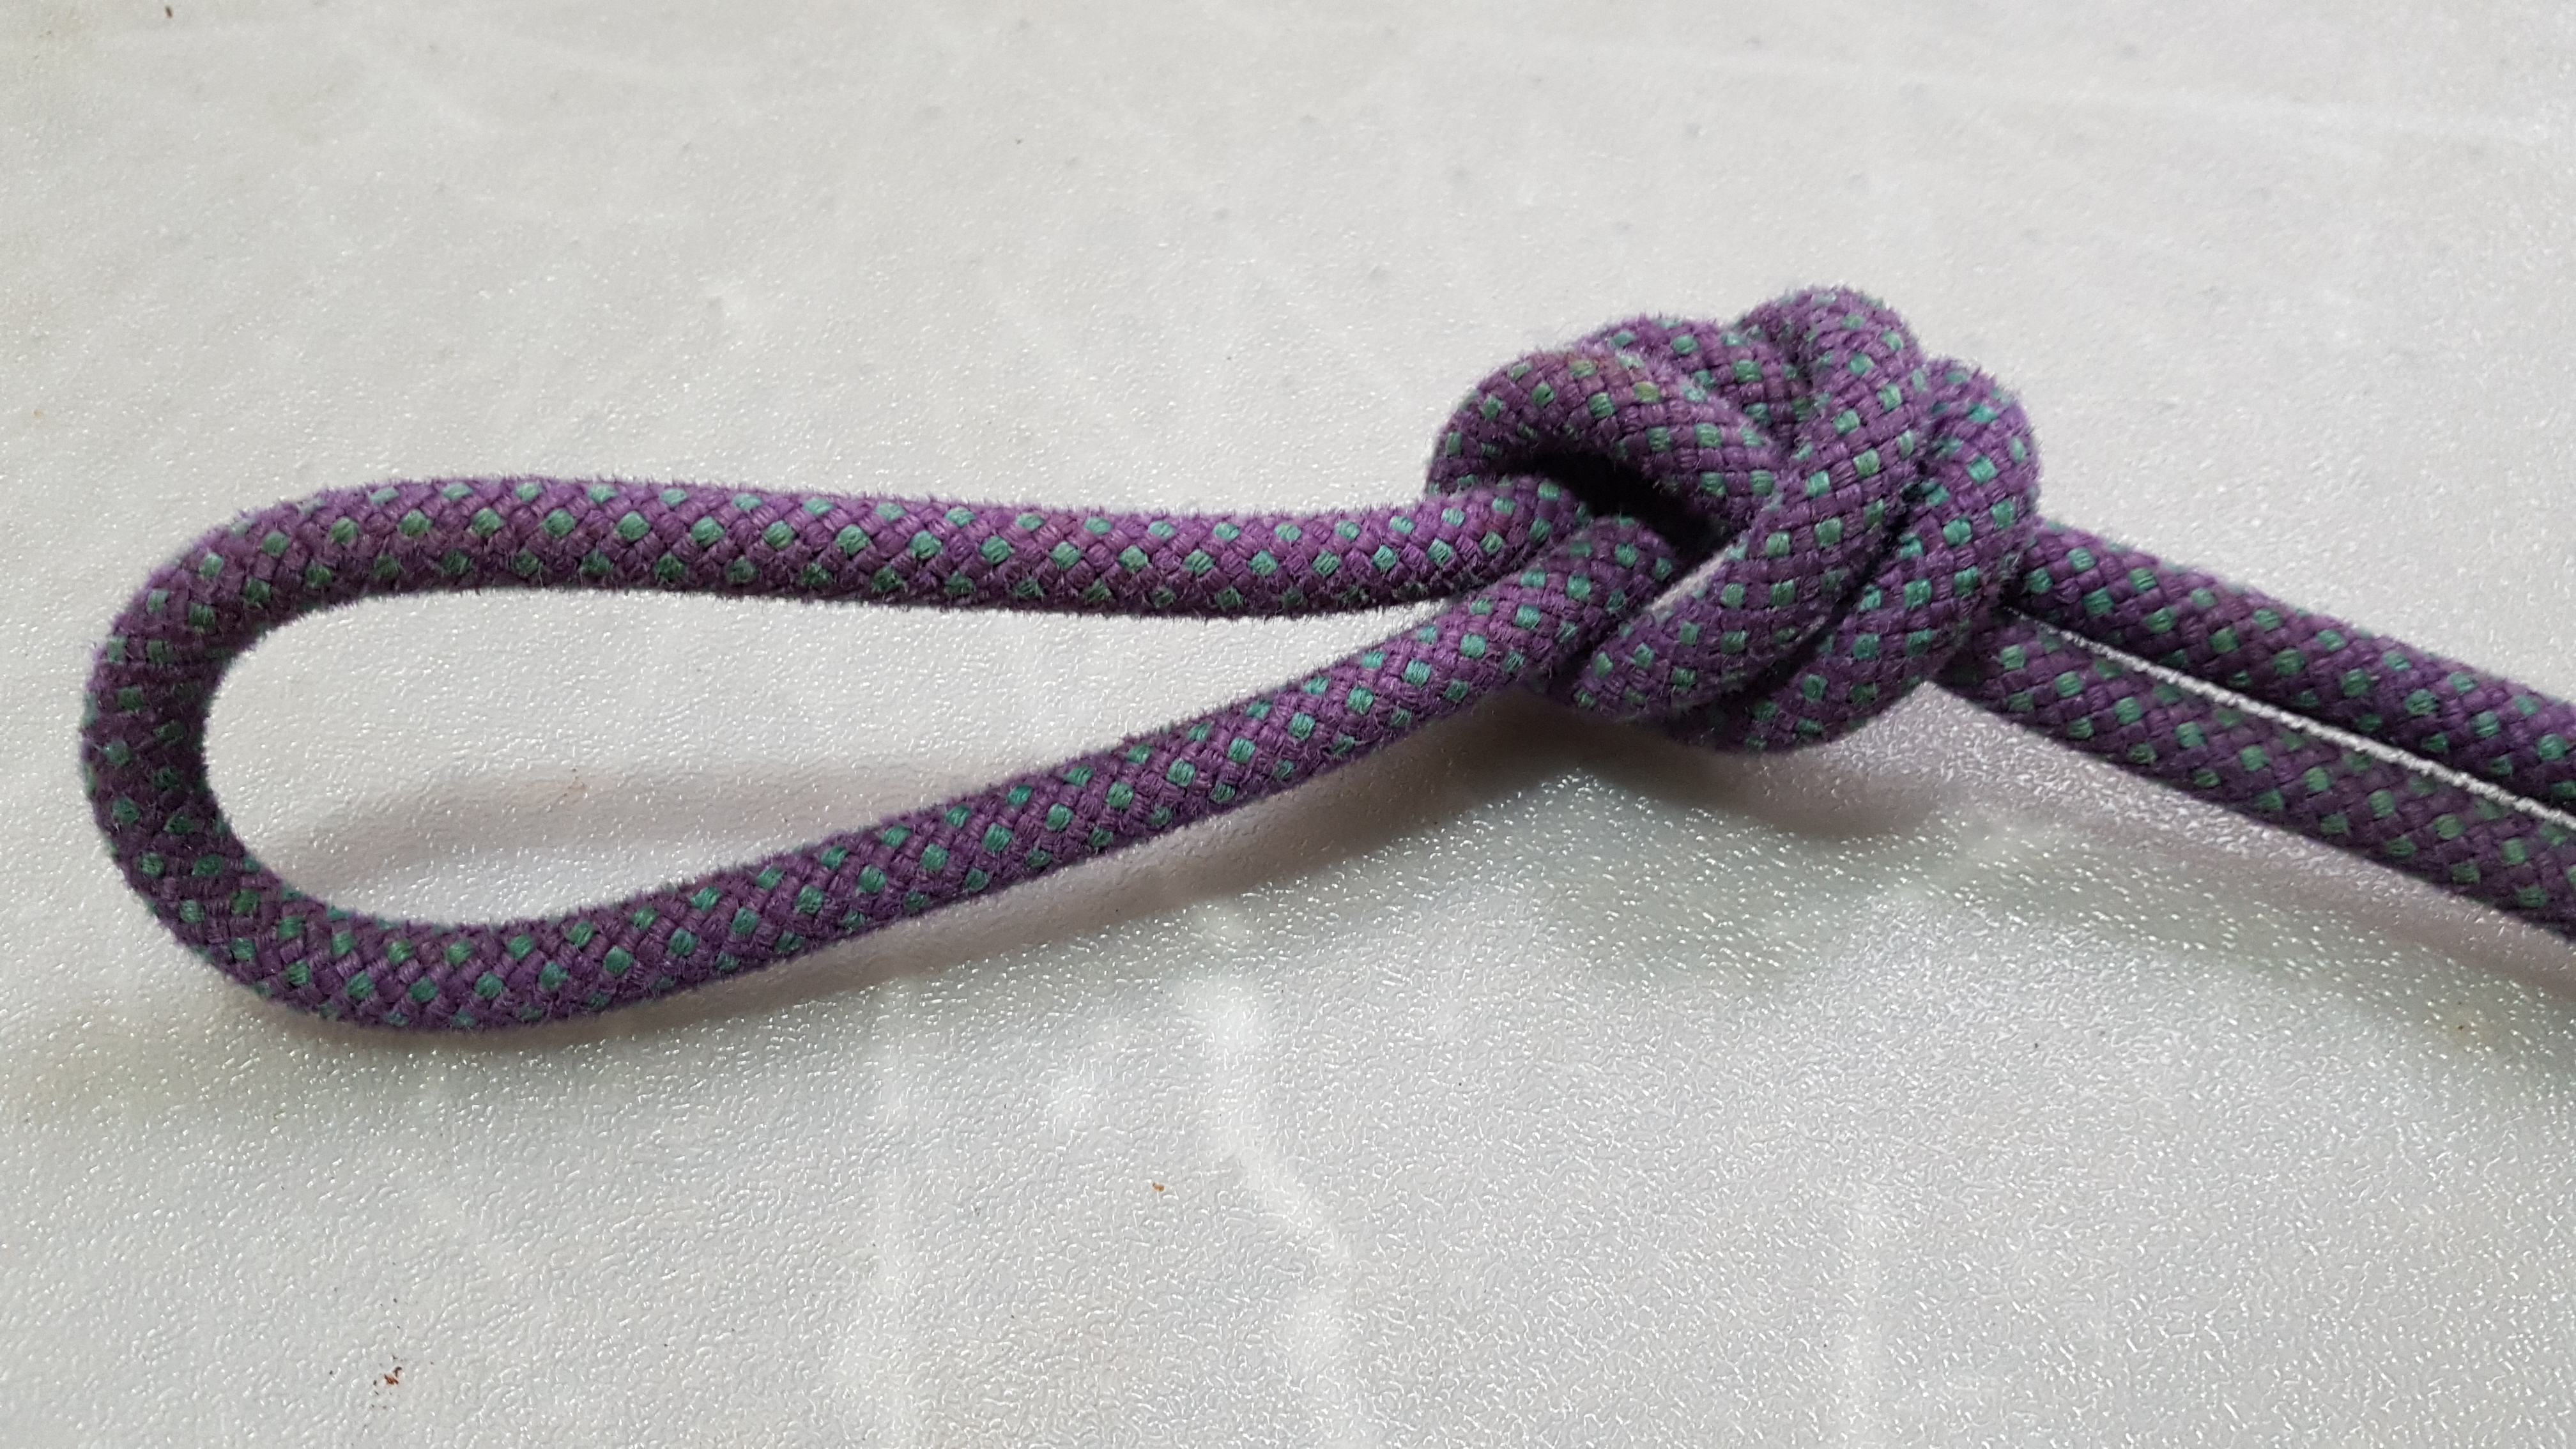 Overhand knot with 2 strands